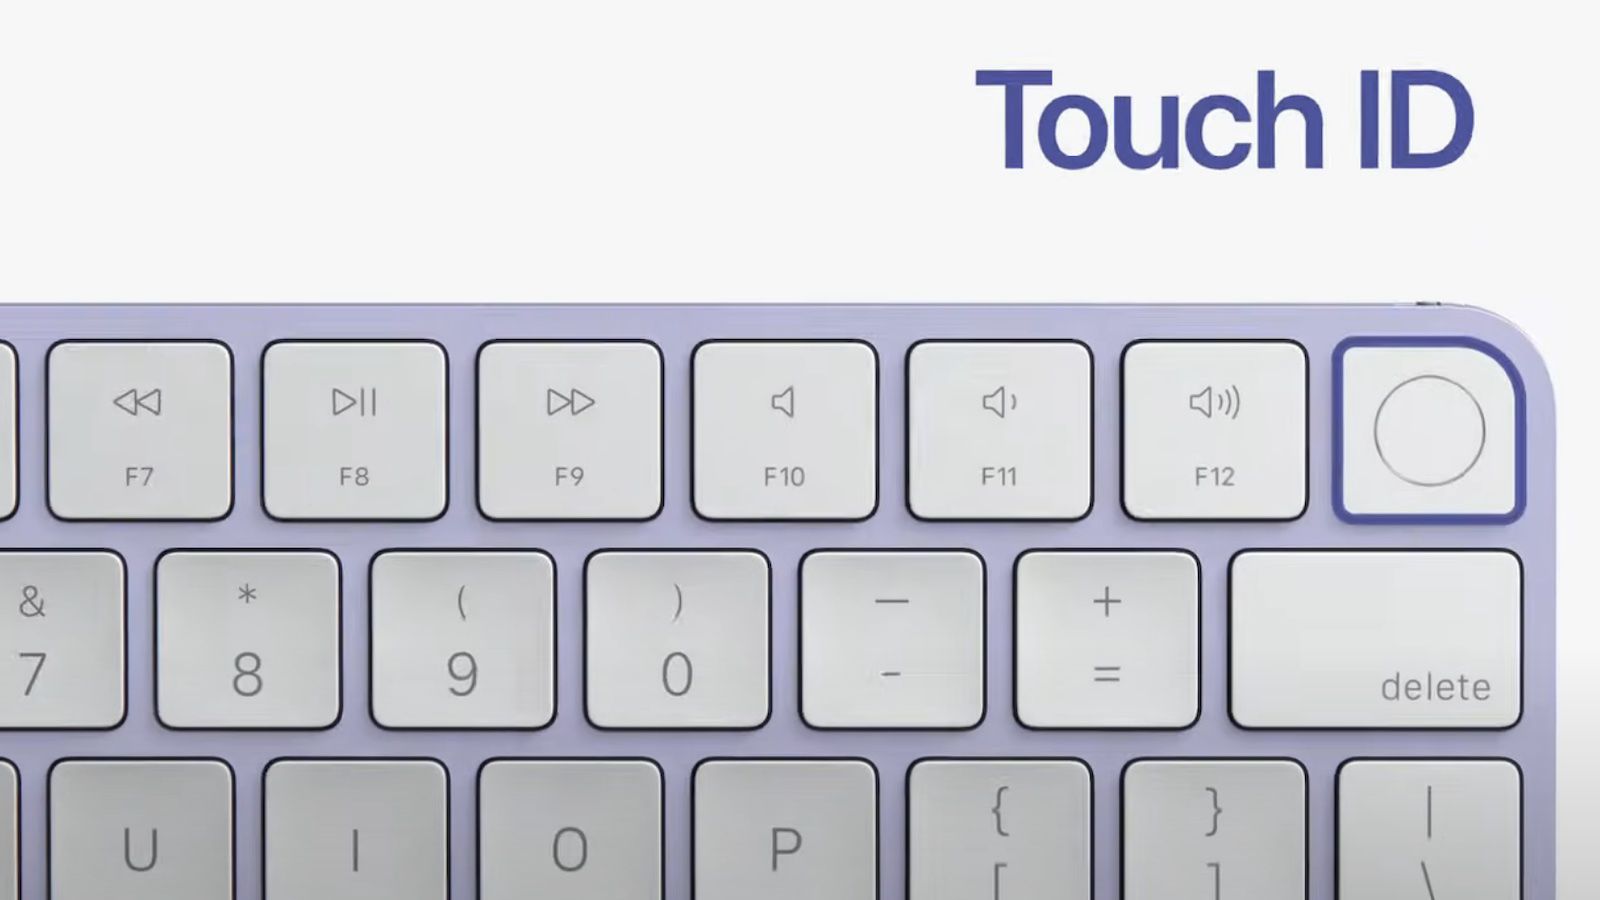 Magic Keyboard With Touch ID Compatible With All M1 Macs, But Only 